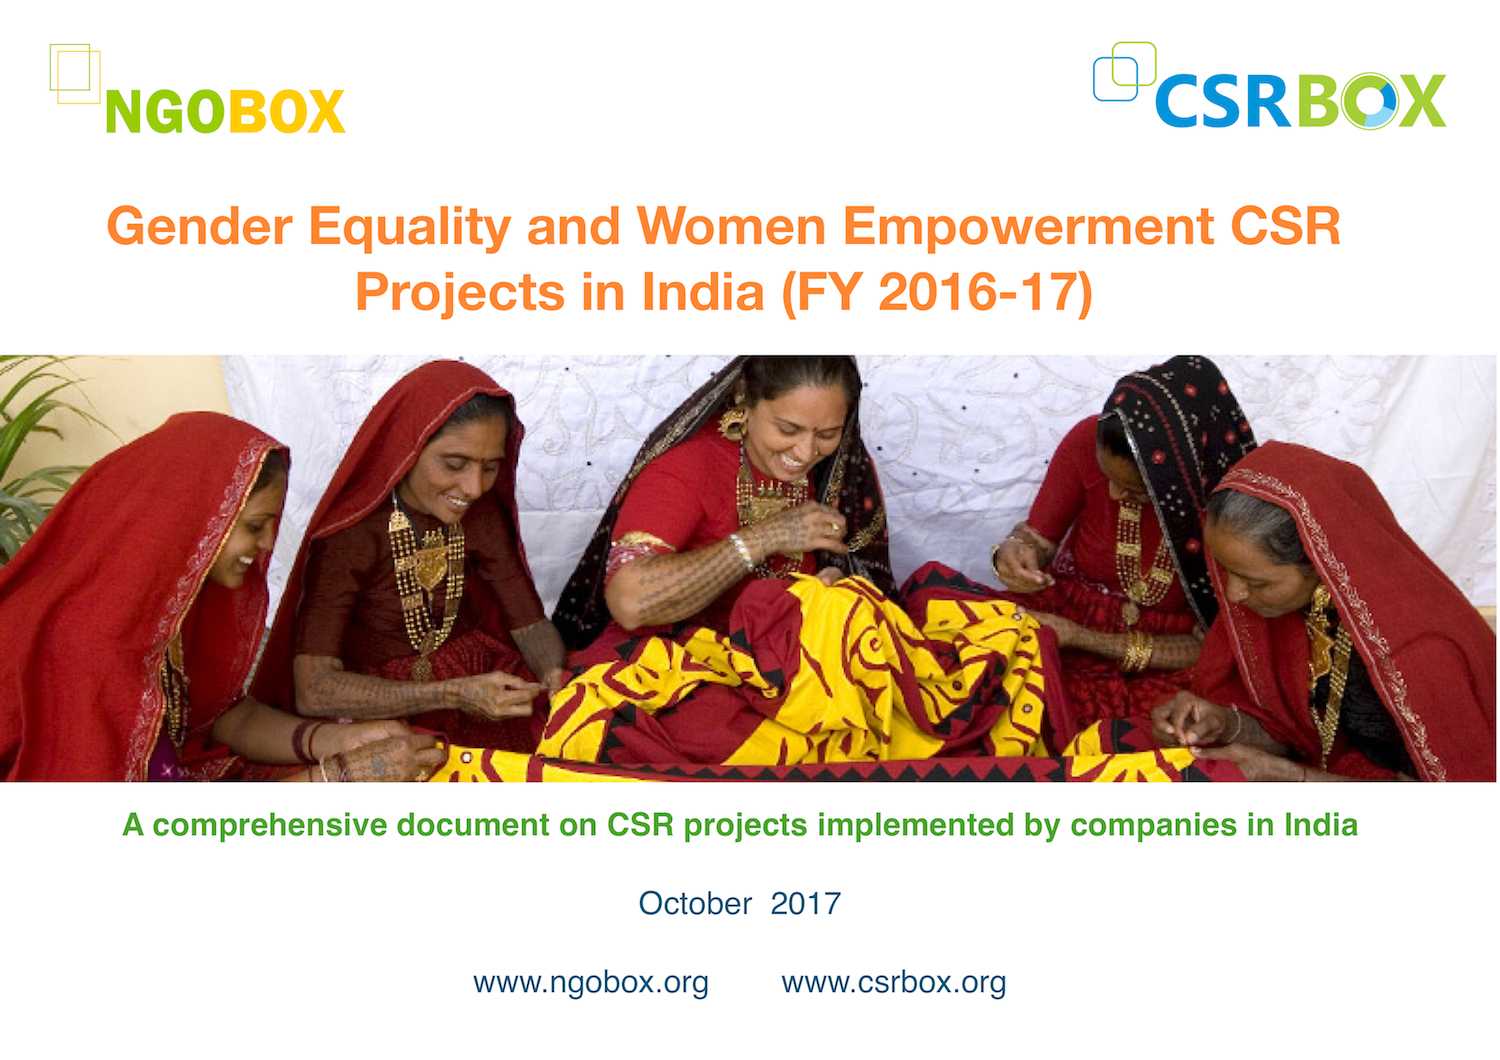 Women Empowerment CSR Projects in India (FY 2016-17)